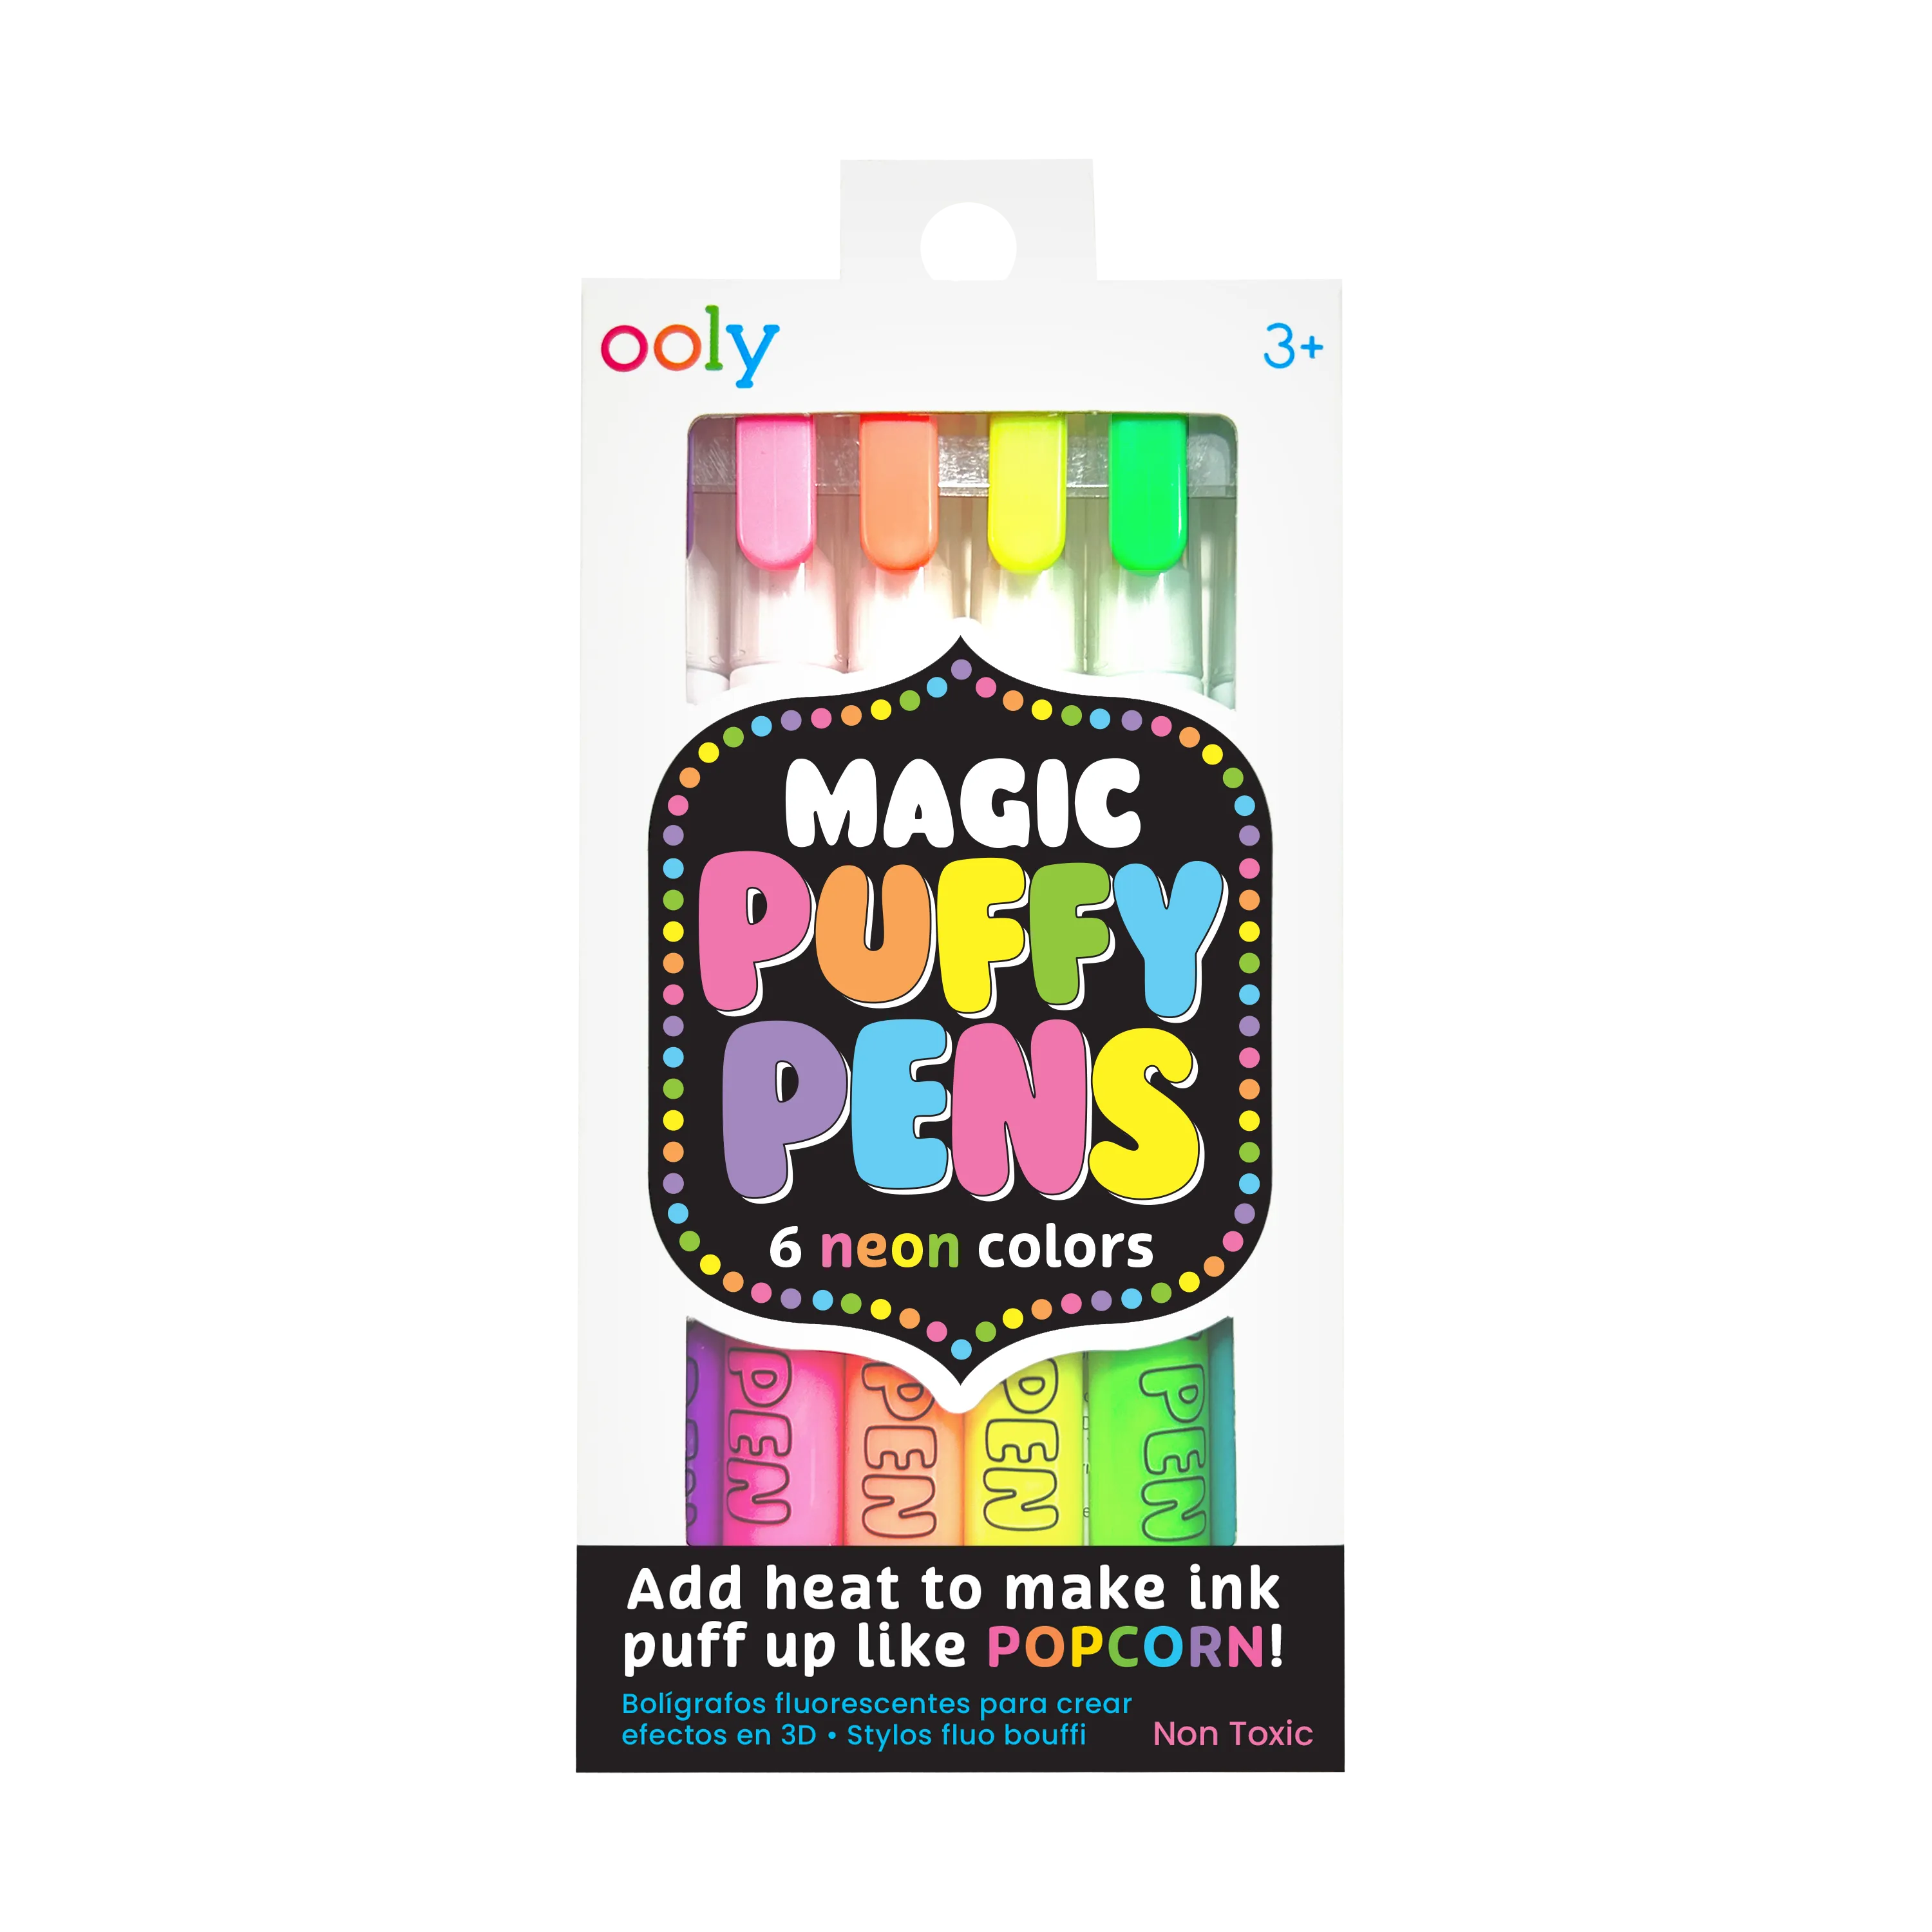 OOLY Magic Puffy Neon Pens front of packaging